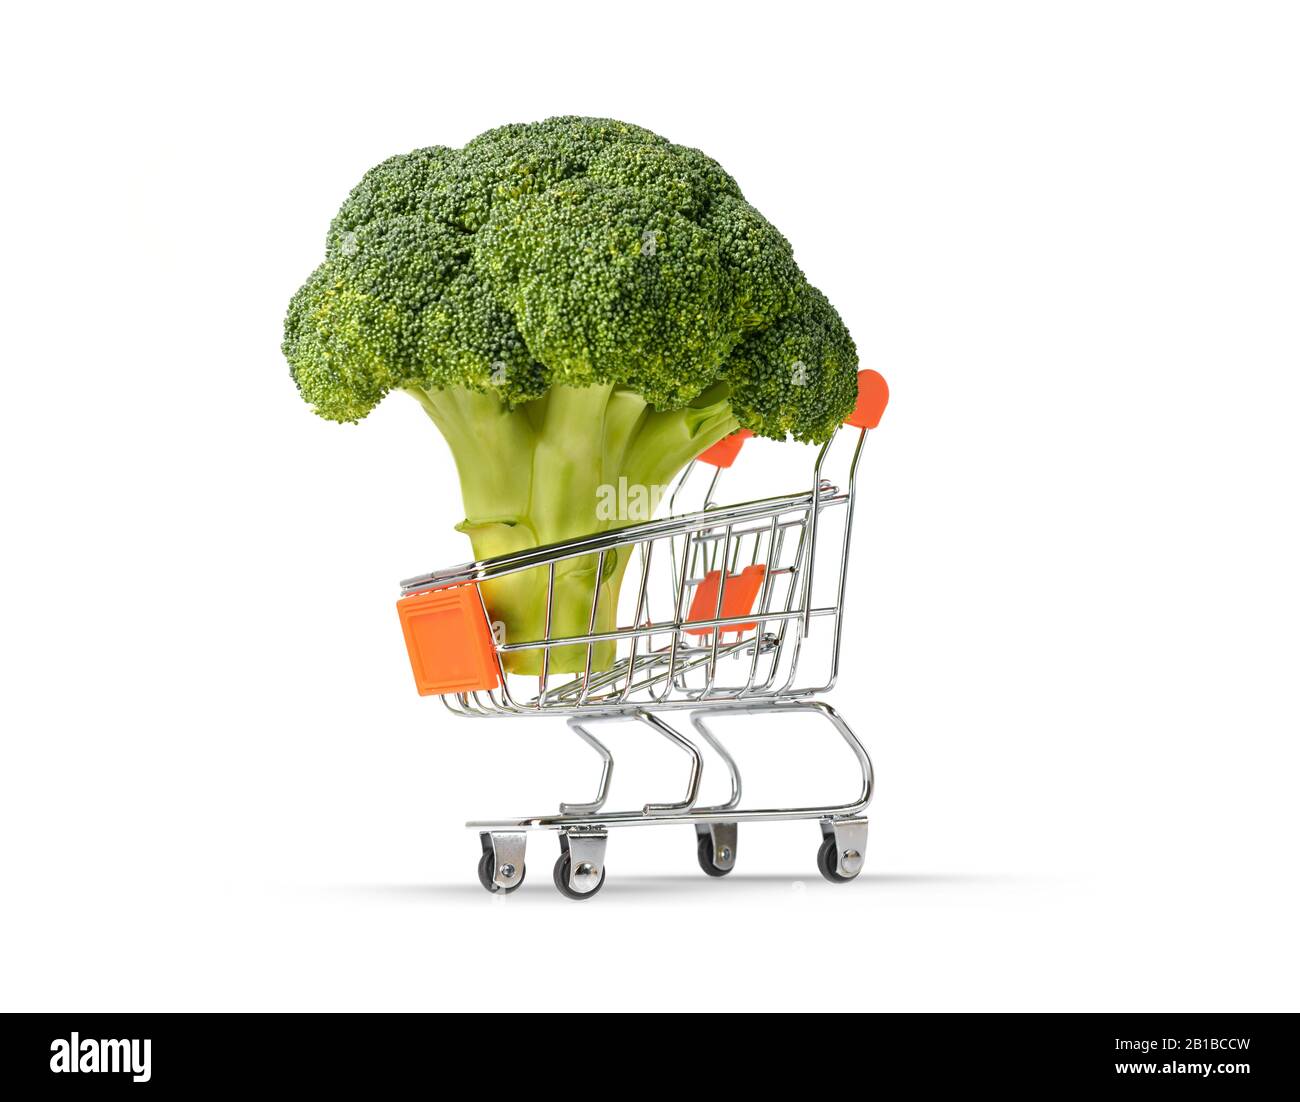 Fresh broccoli. Broccoli in the grocery cart. Shopping cart isolated on white bacnground. Broccoli isolated on white background. Copy space Stock Photo